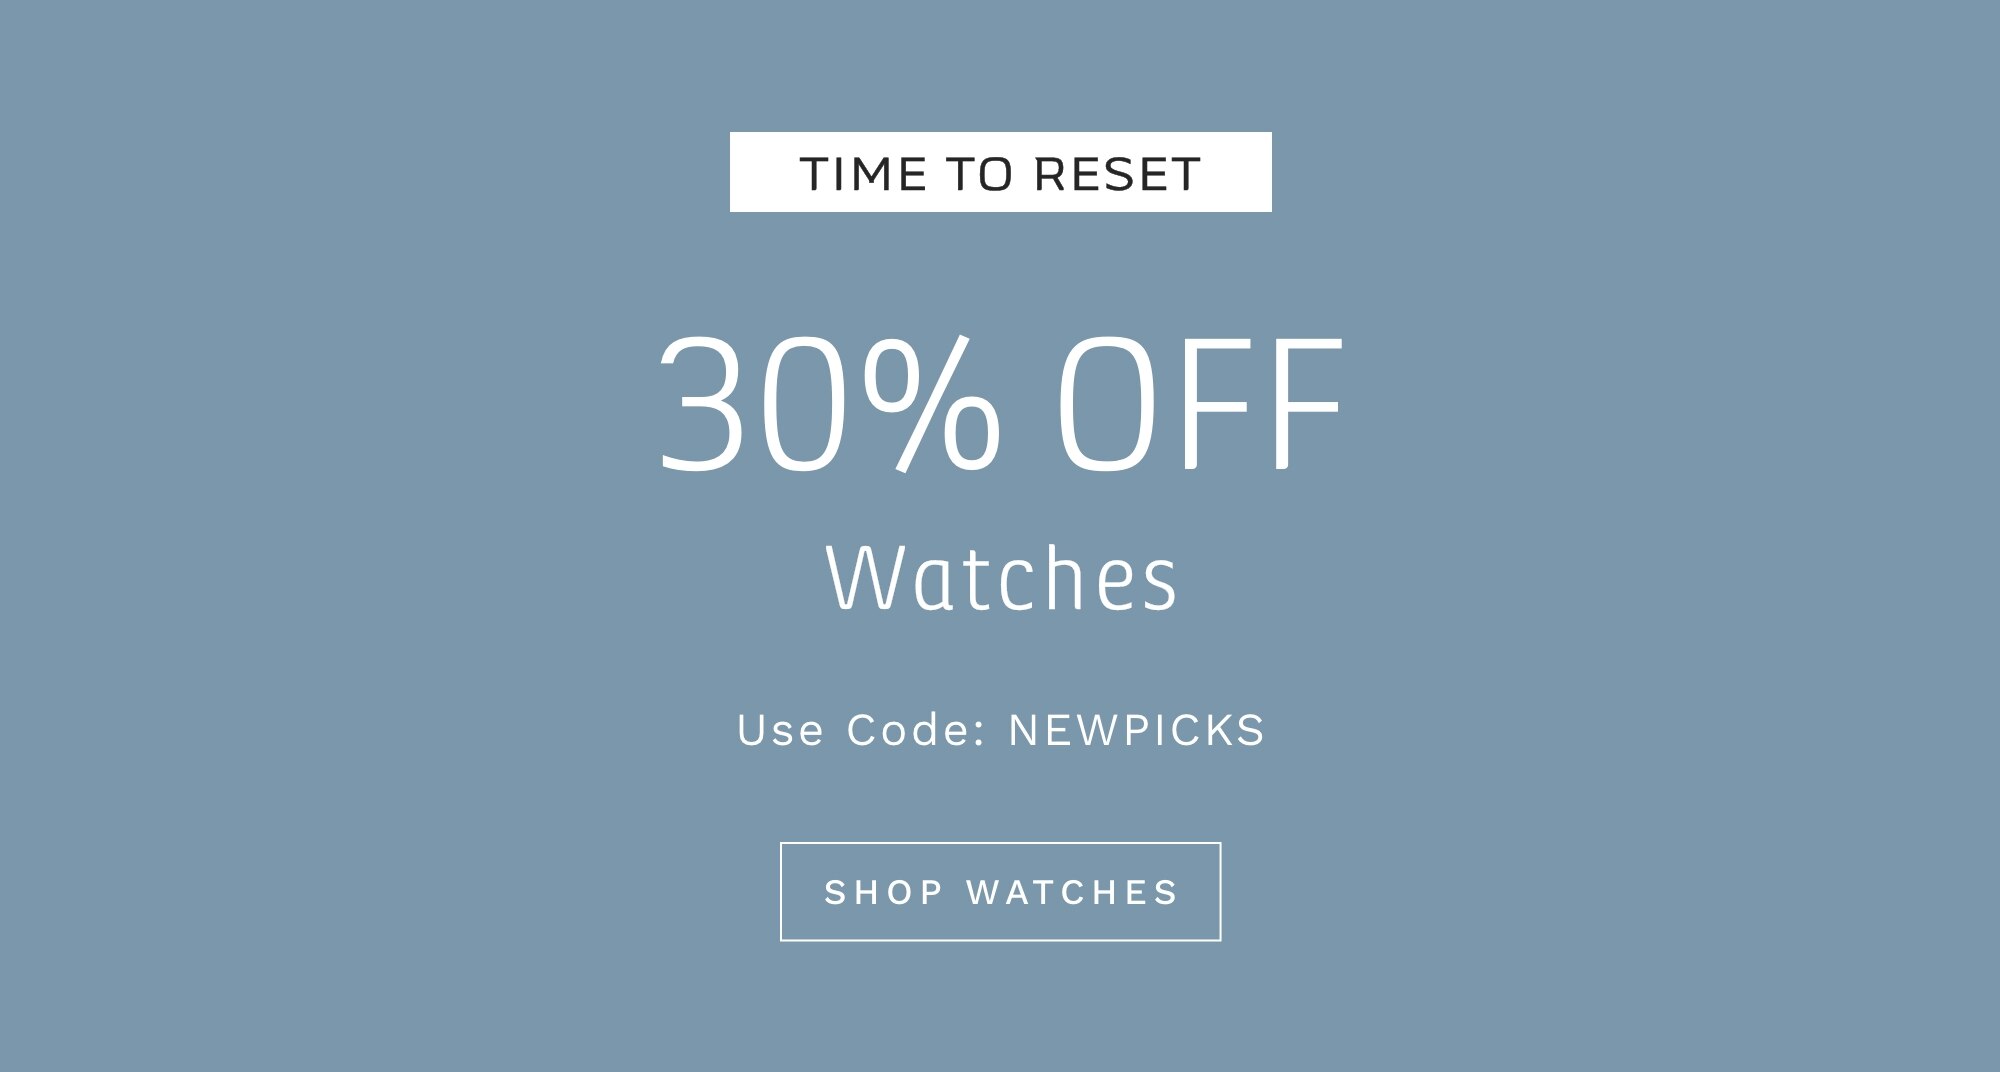 TIME TO RESET 30% OFF WATCHES Use Code: RESET SHOP WATCHES